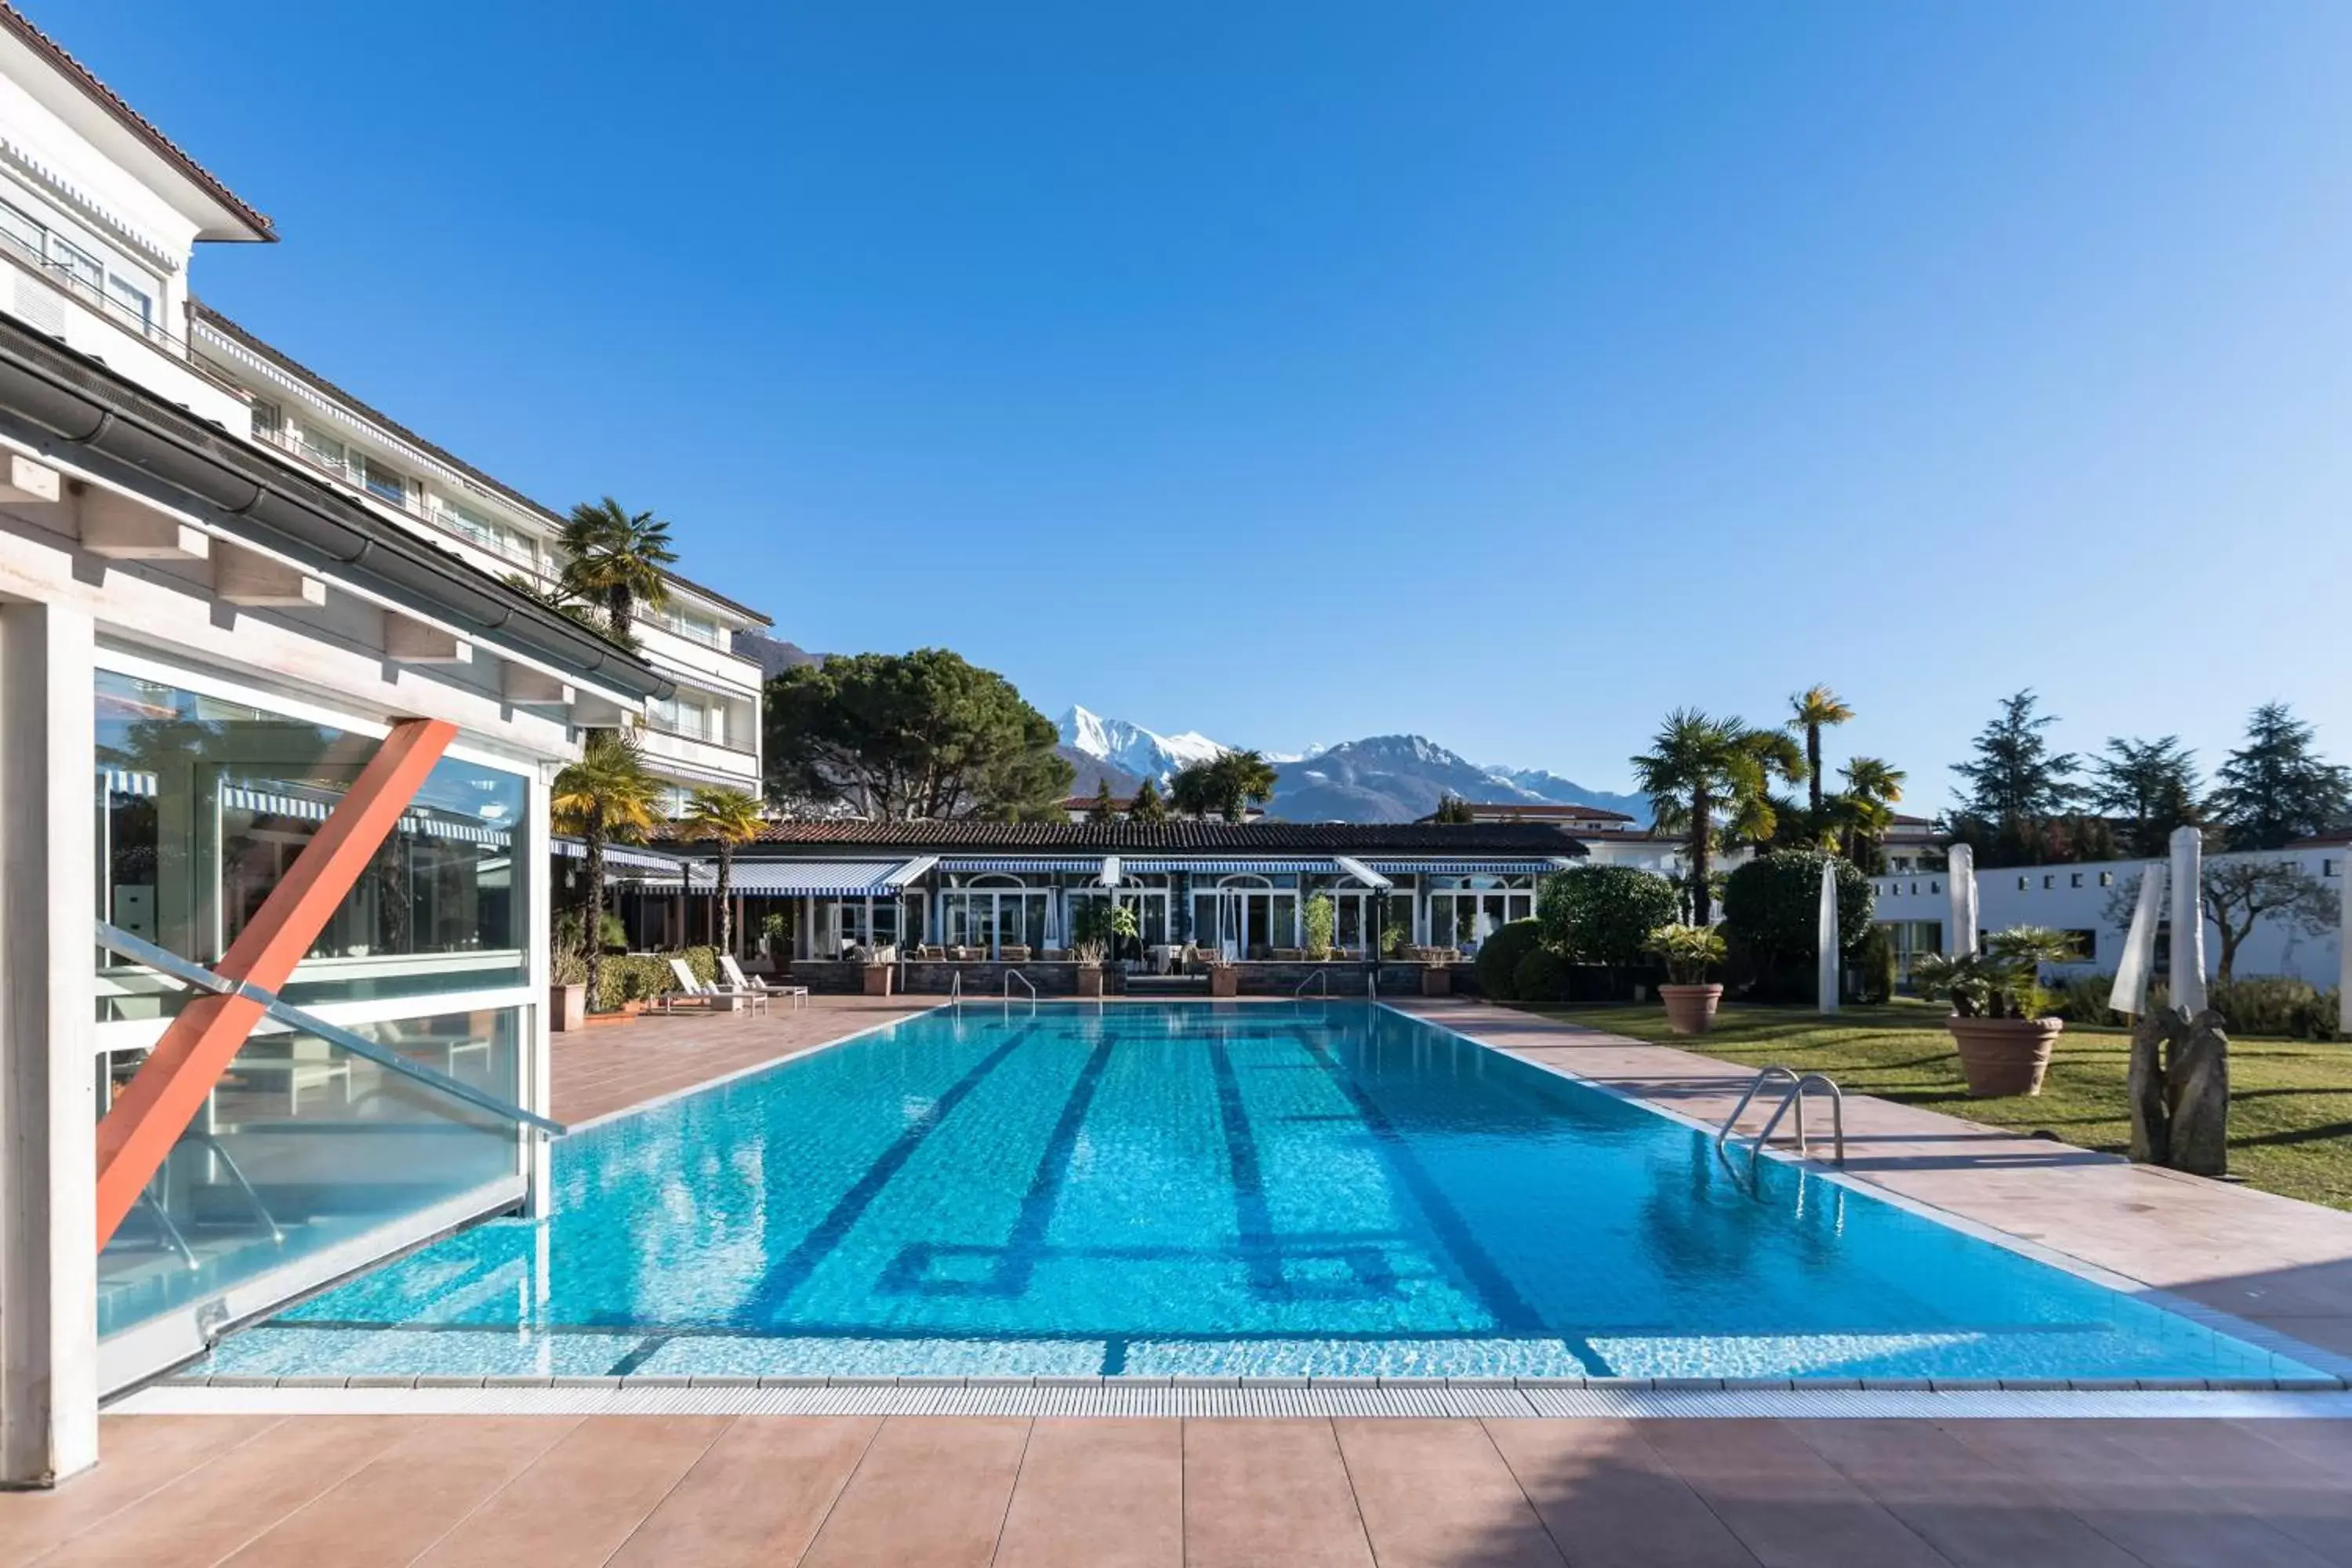 Property building, Swimming Pool in Parkhotel Delta, Wellbeing Resort